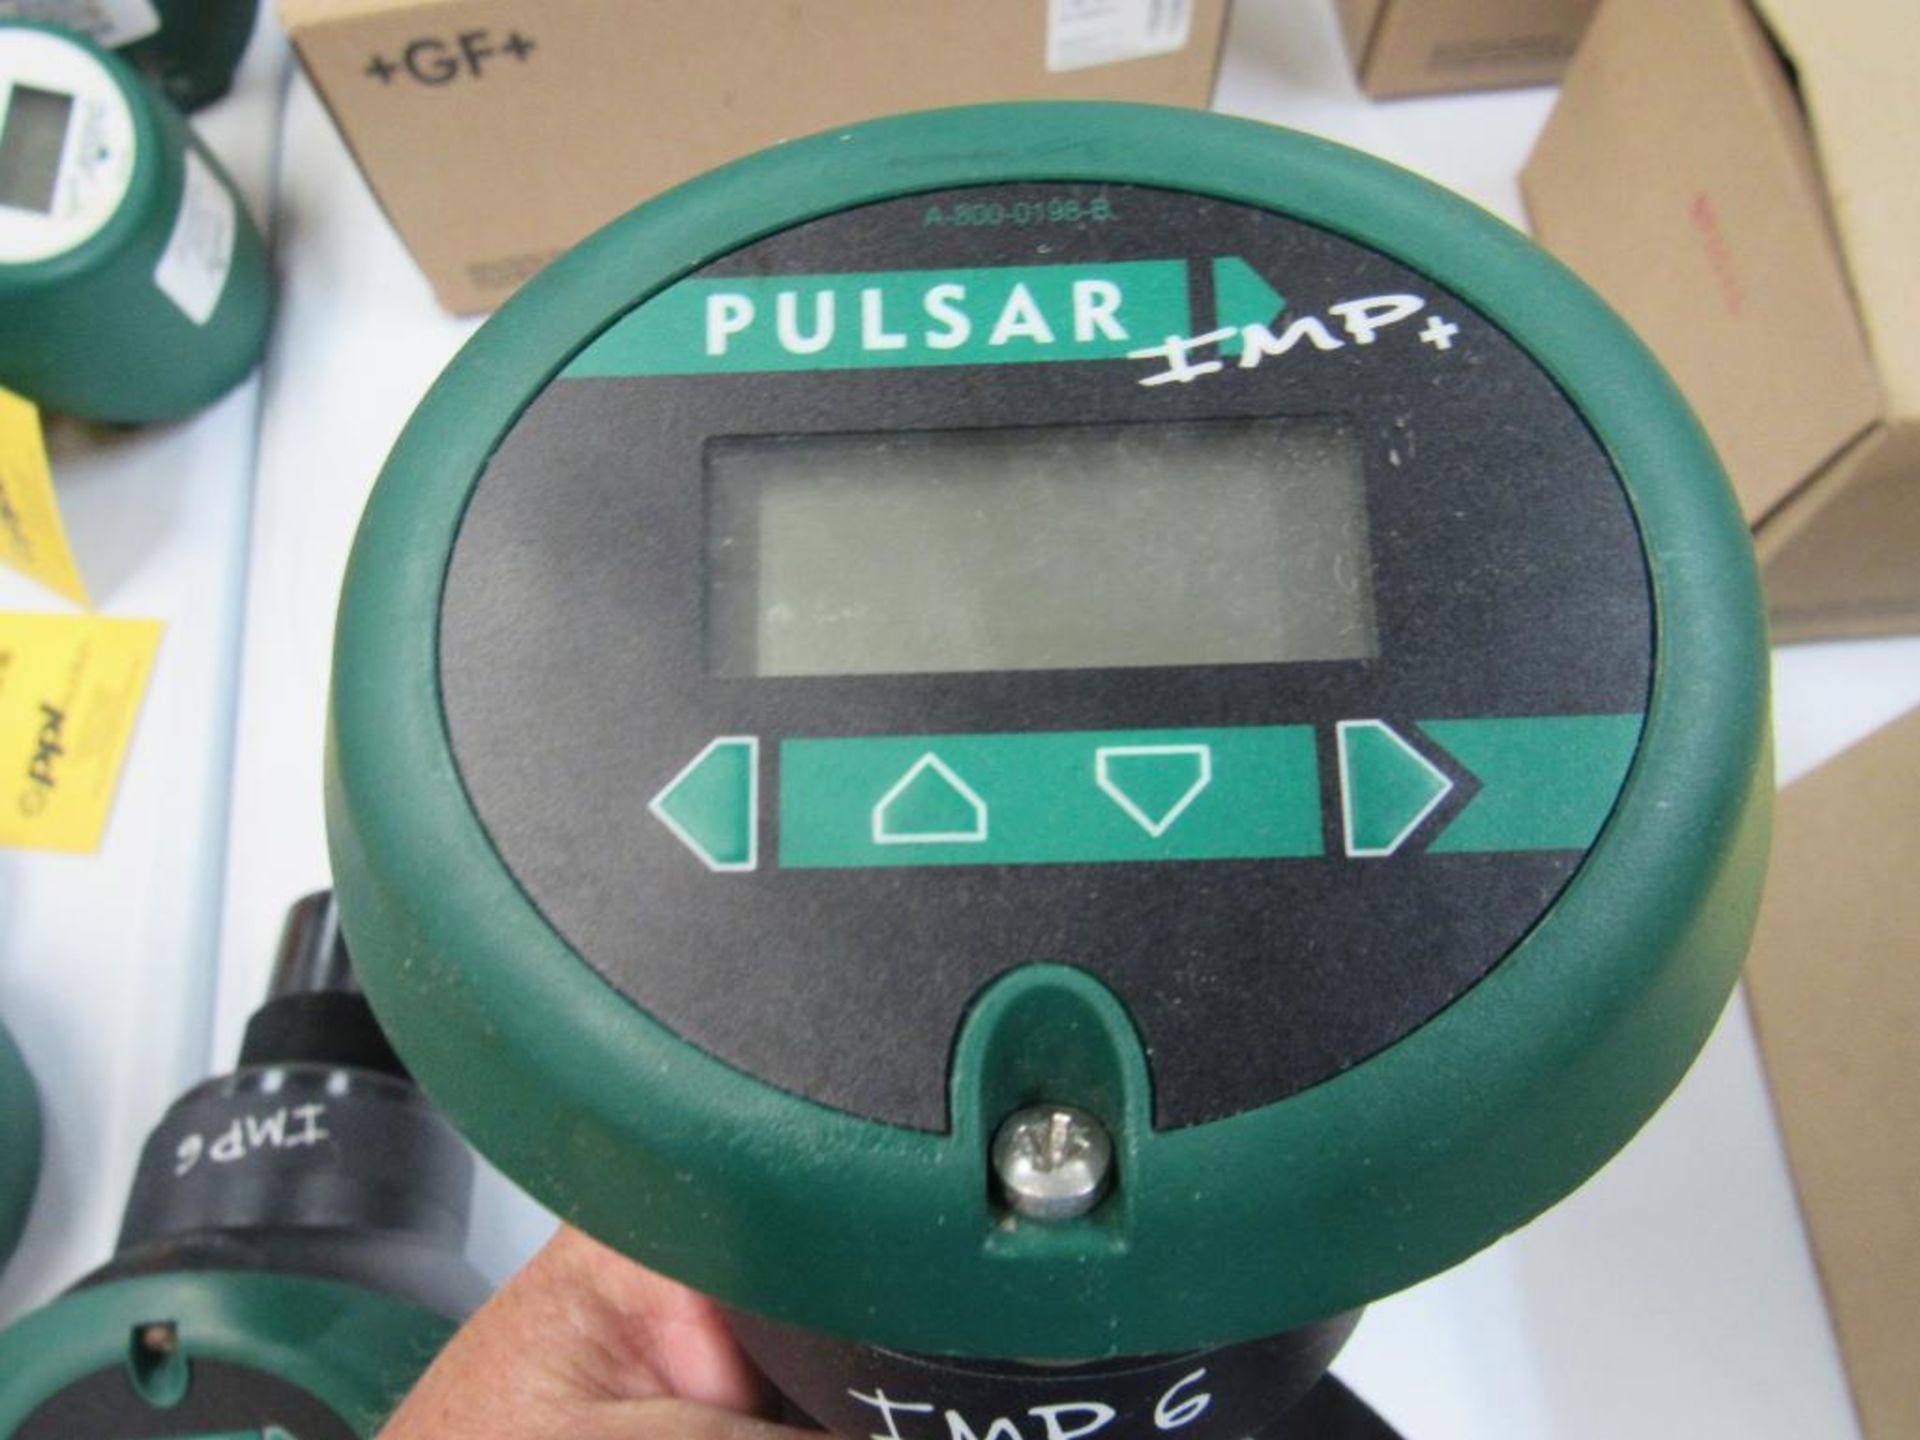 PULSAR (X2) IMP6 - Non contacting ultrasonic level measurement and digital echo processing - Image 2 of 2